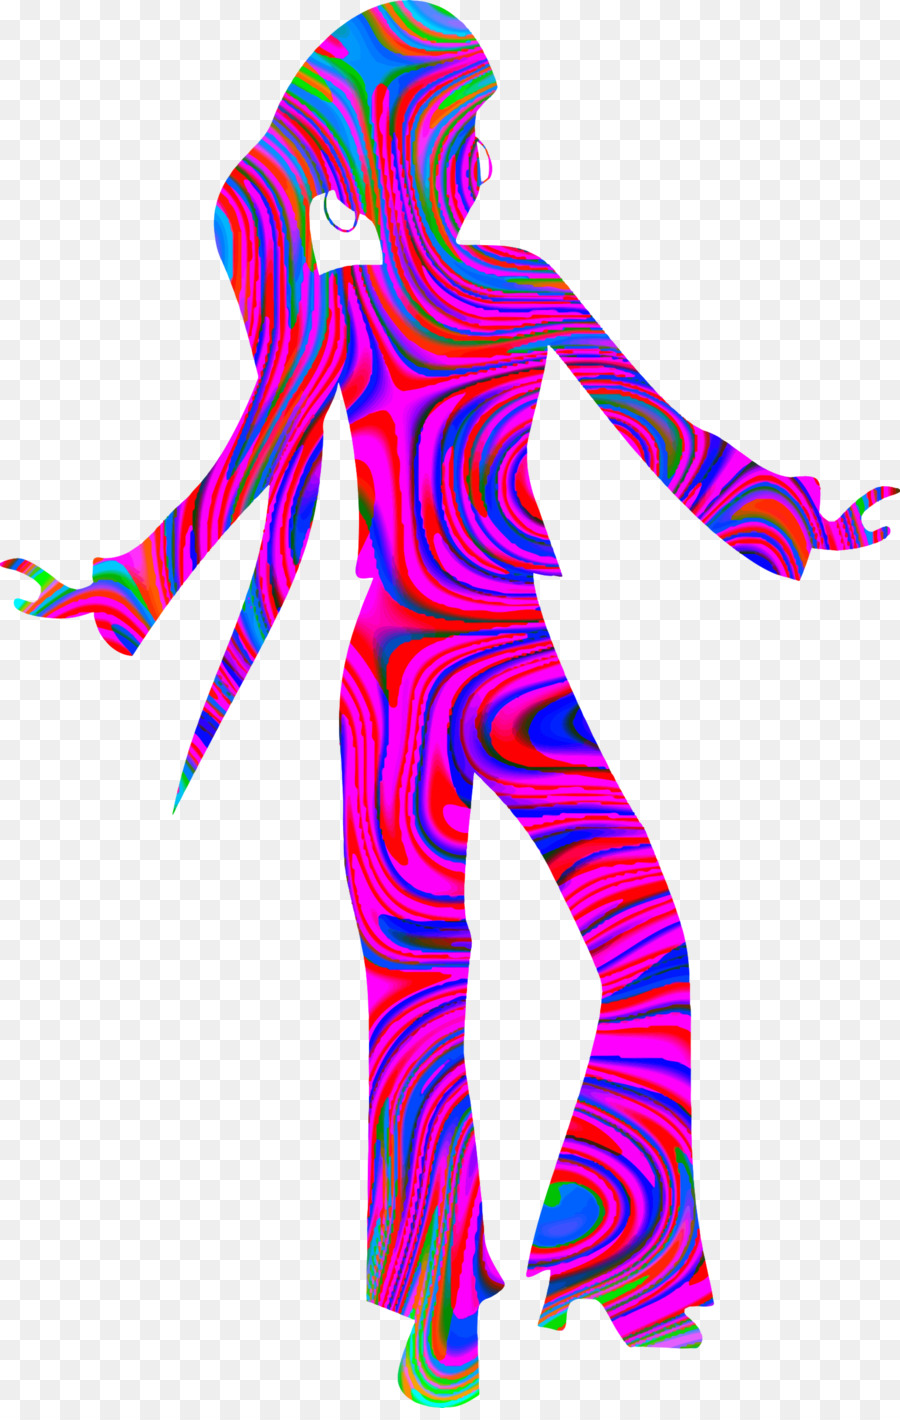 Dance Disco Silhouette Clip art - disco png download - 1534*2400 - Free Transparent  png Download.